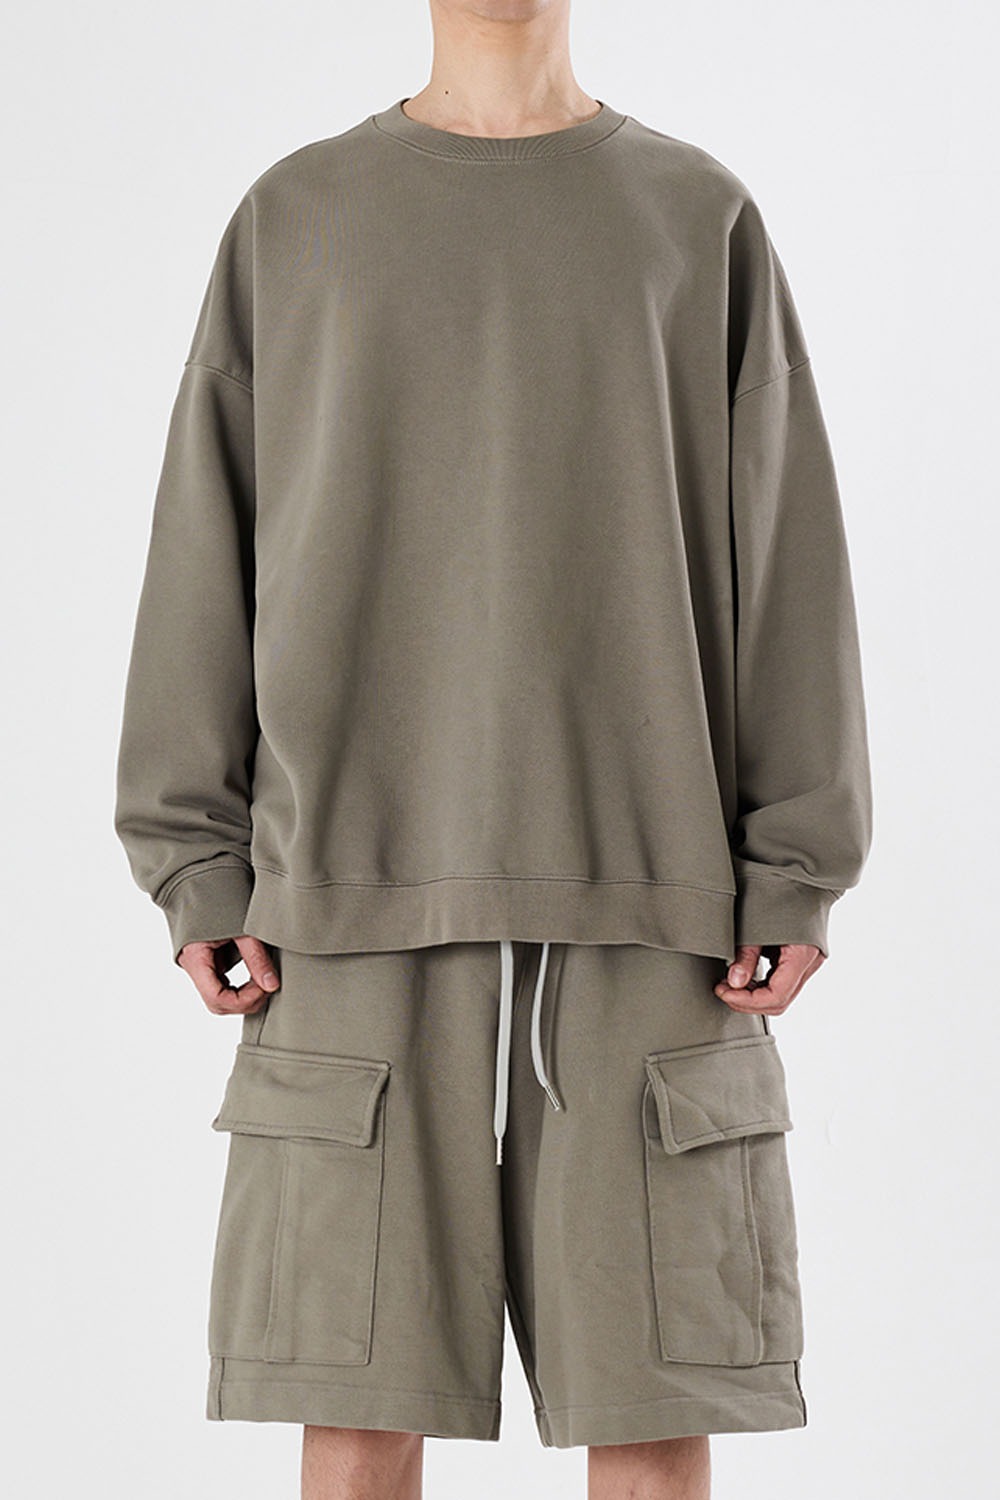 Baggy Sweat Shirt-Olive Gray